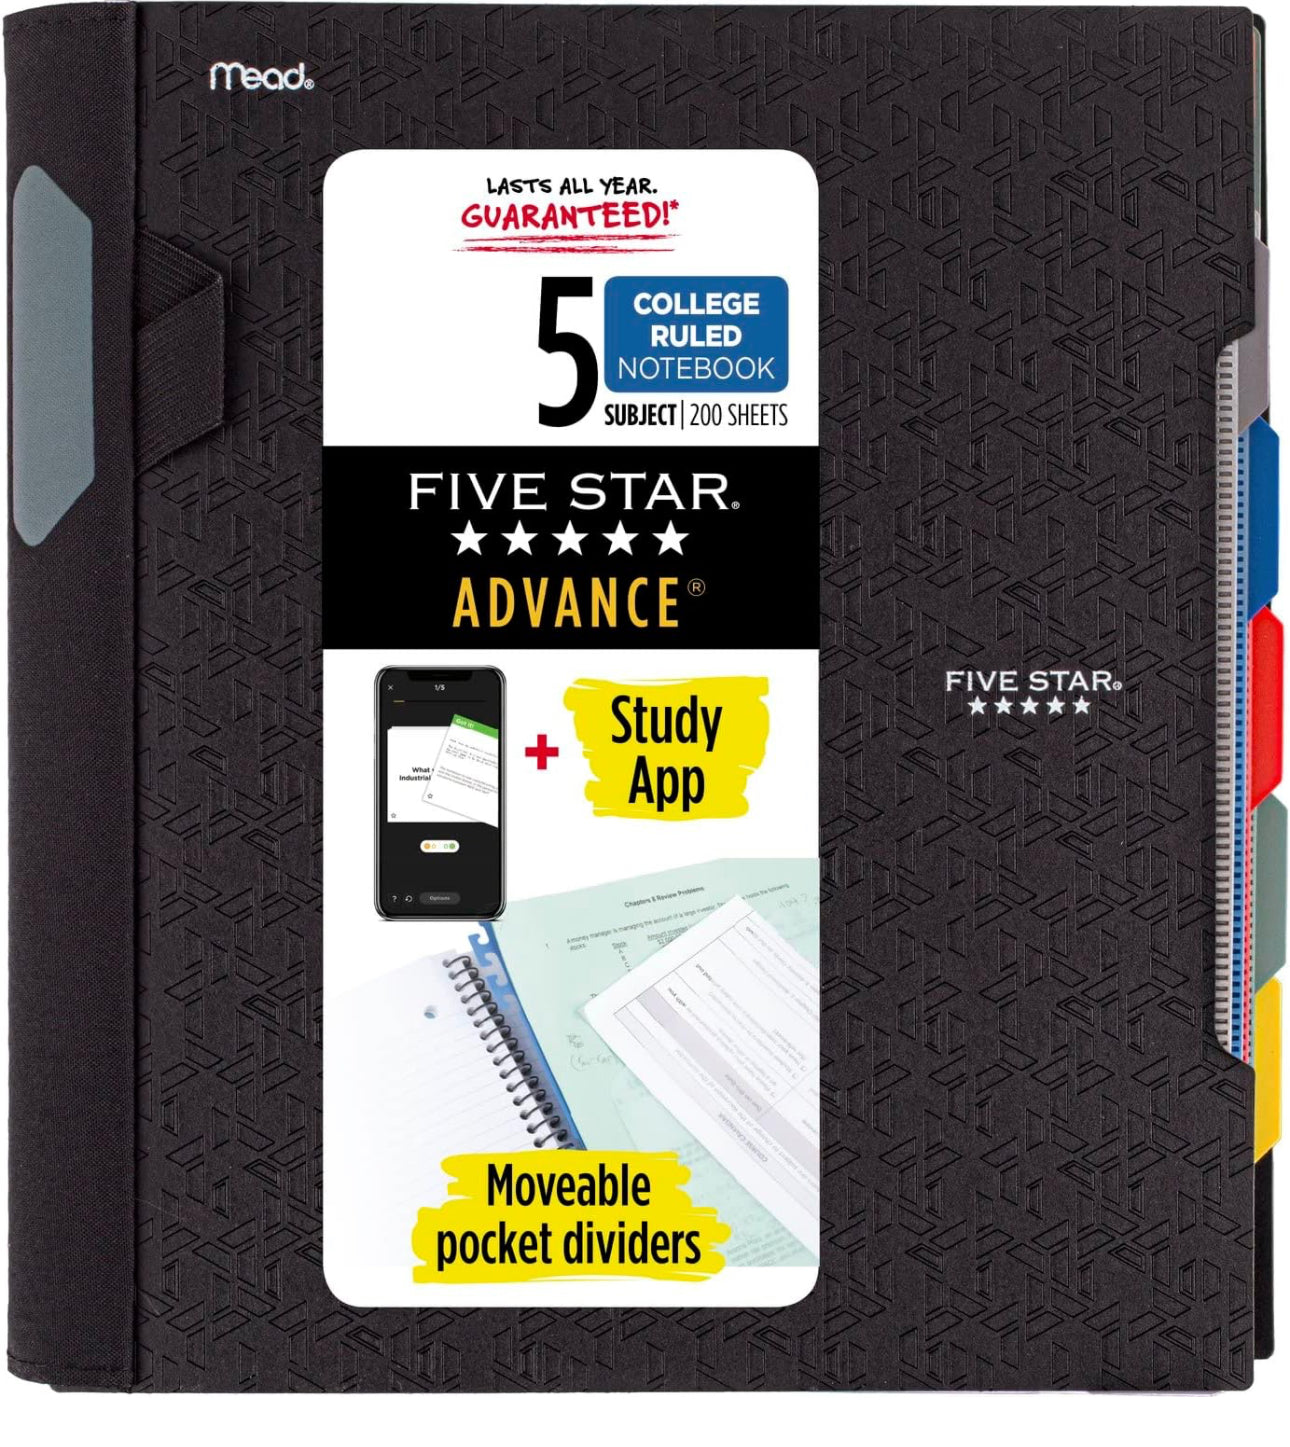 Case of 4 Five Star Spiral Notebook + Study App, 5 Subject, College Ruled Paper, Advance Notebook with Spiral Guard, Movable Tabbed Dividers and Expanding Pockets, 8-1/2" x 11", 200 Sheets,